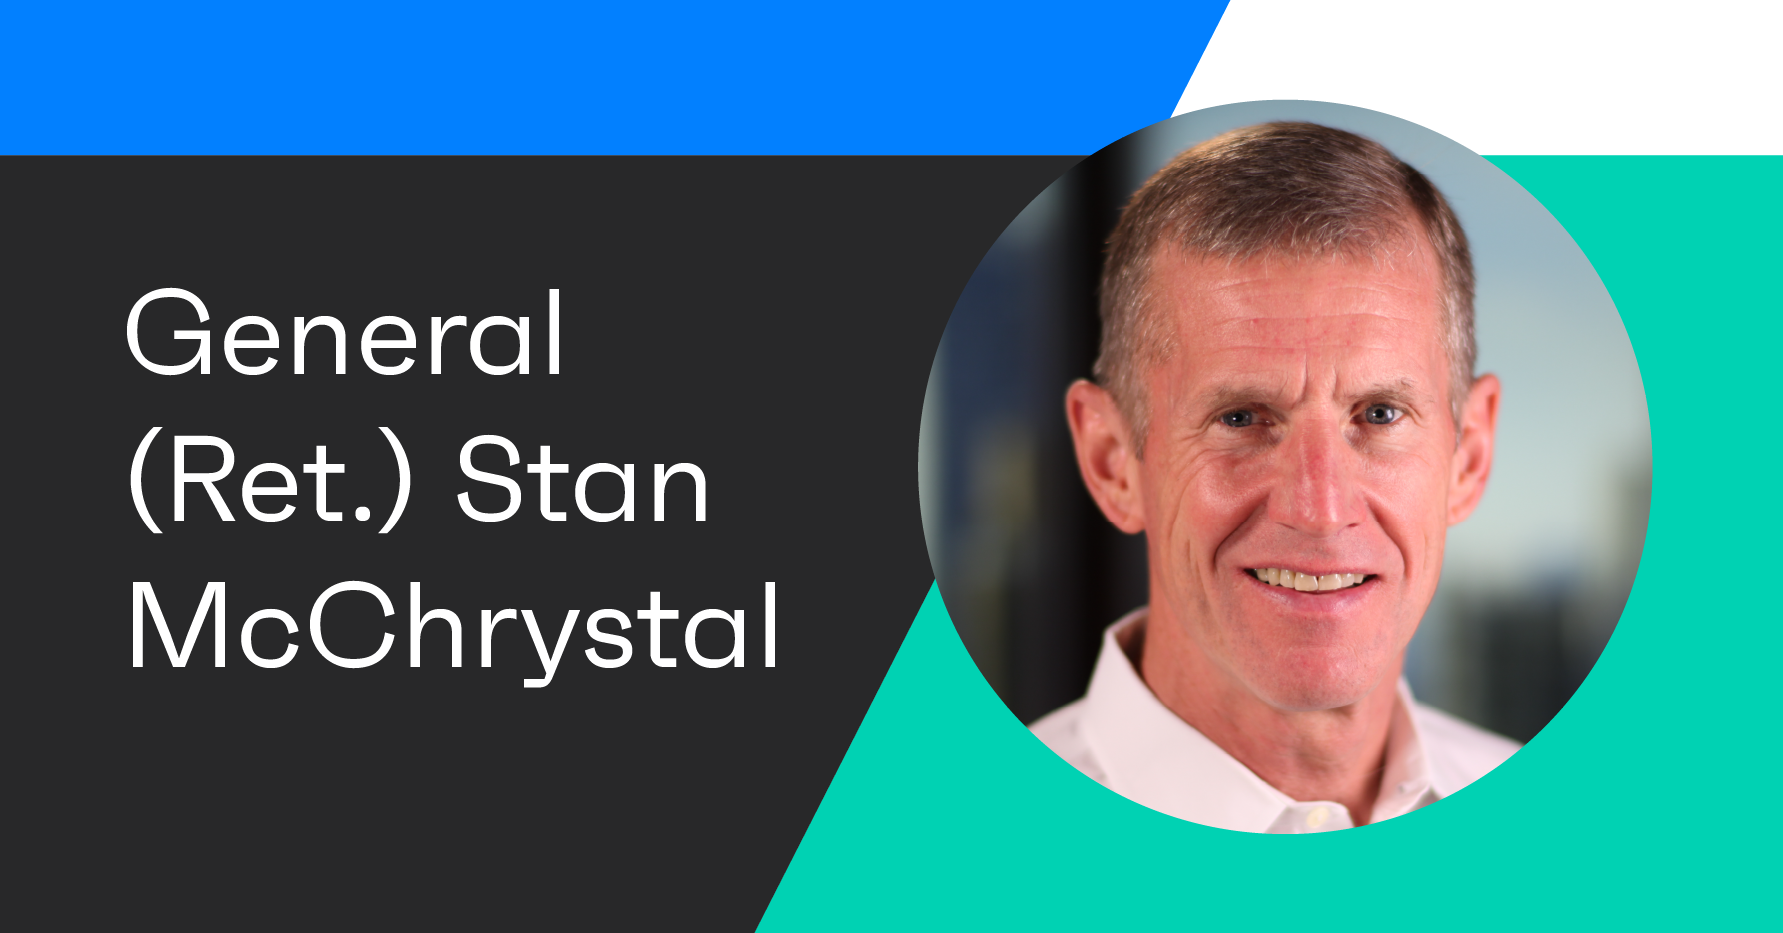 Banner image with headshot photograph of General (Ret.) Stanley McChrystal